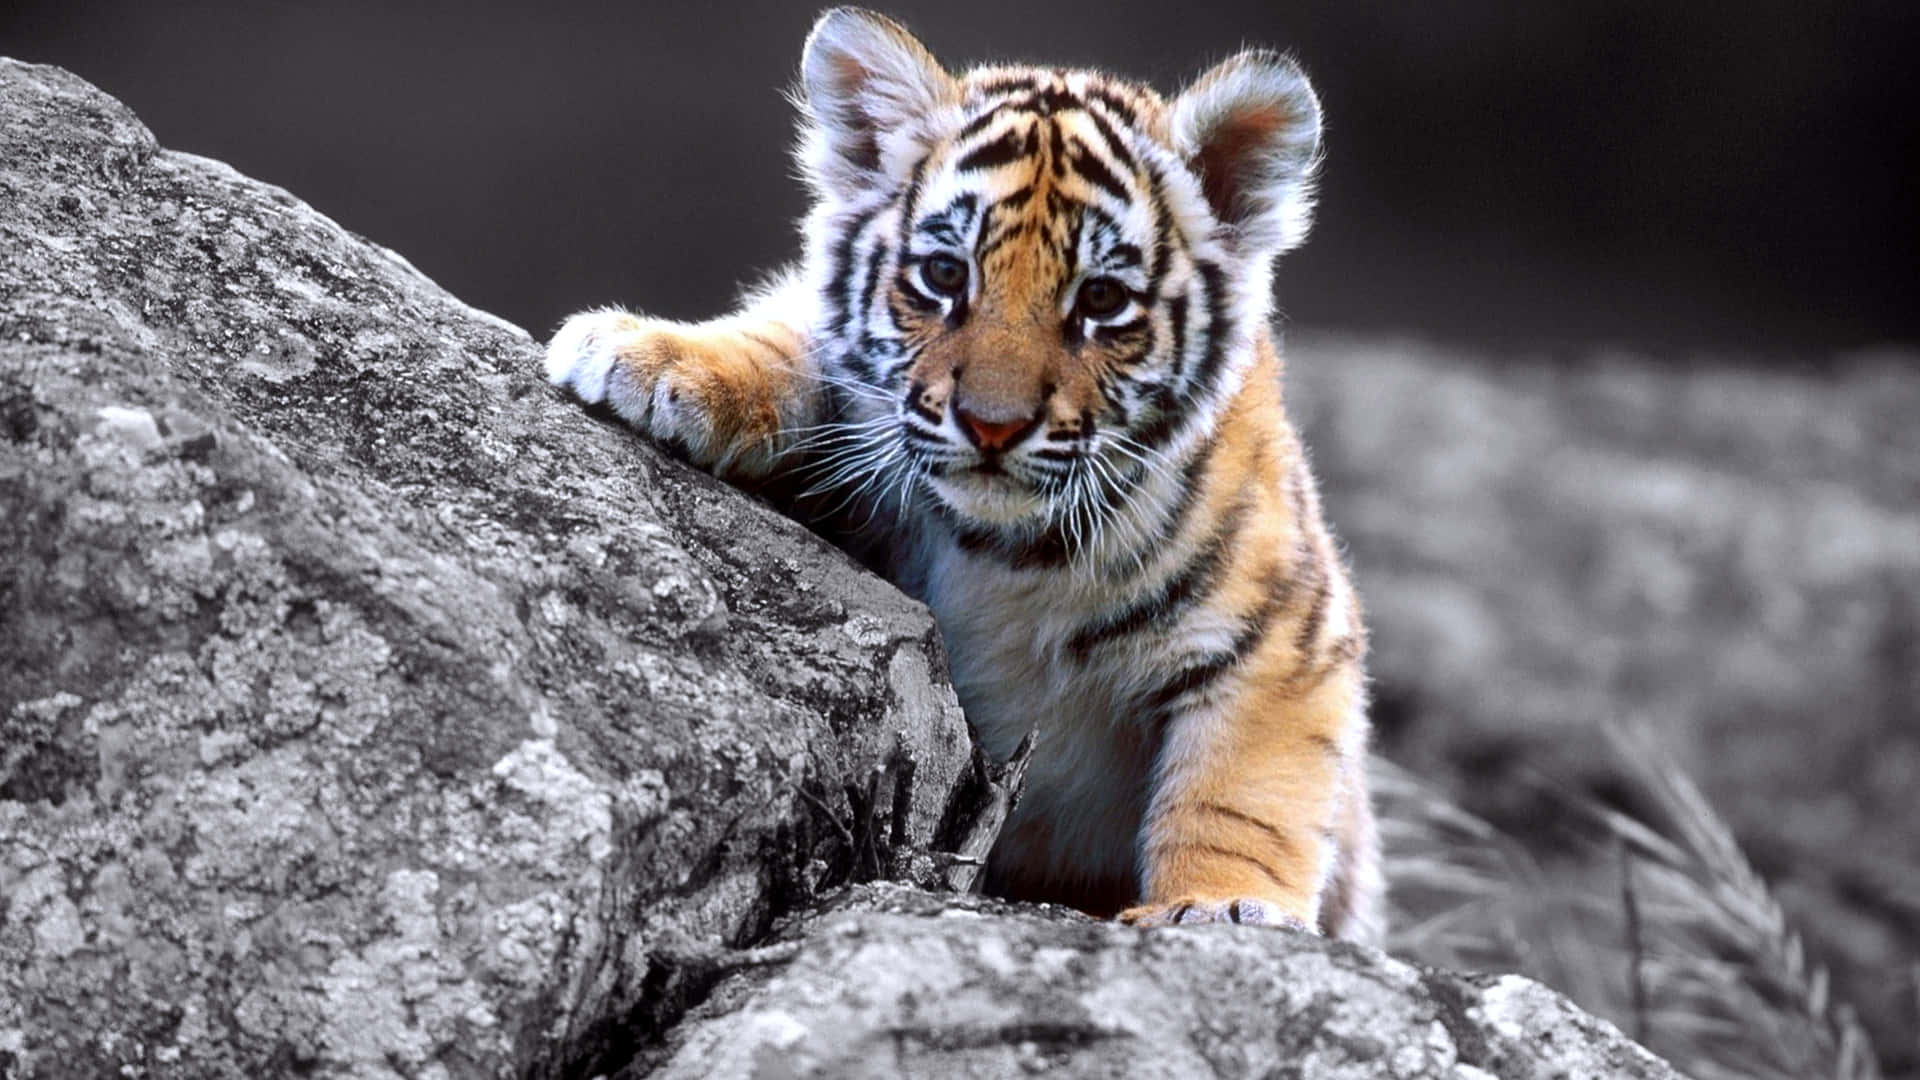 A Cute and Playful Baby Tiger